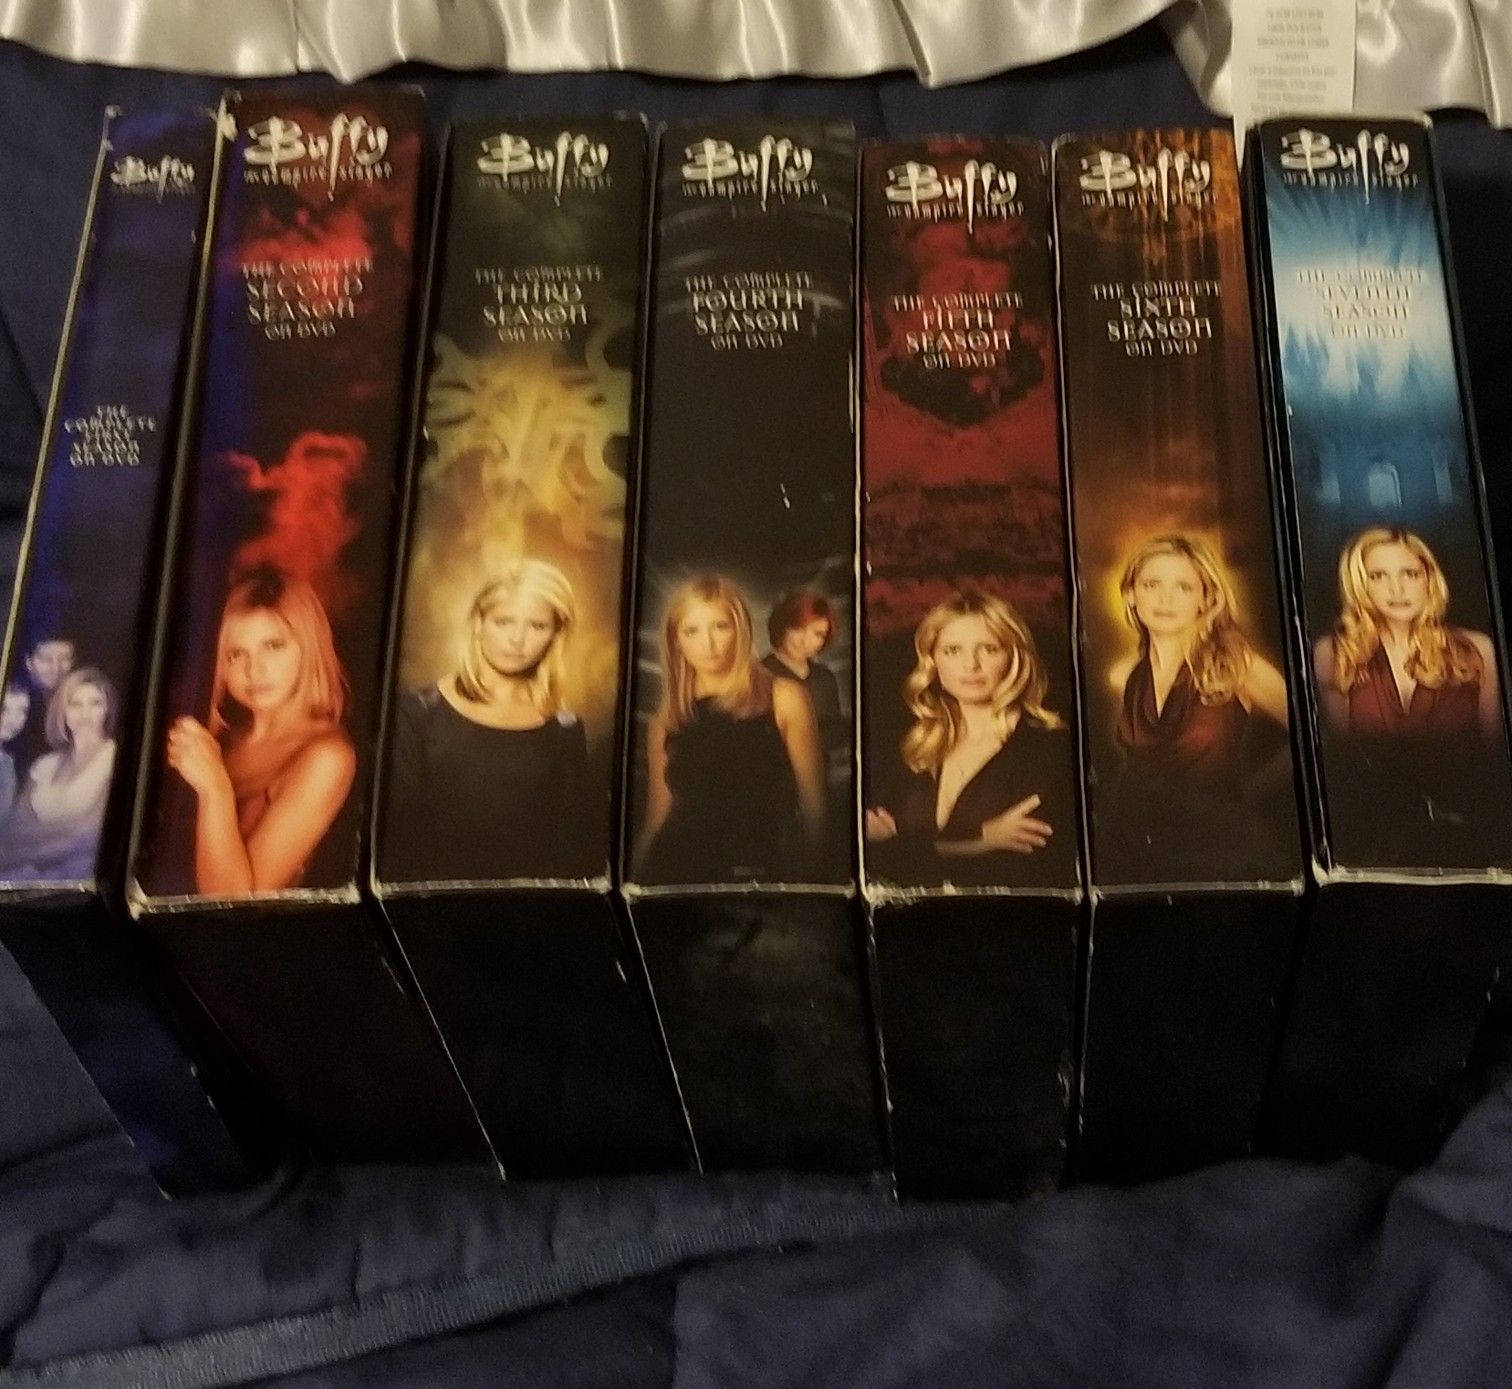 Entire series of Buffy Dvd collection